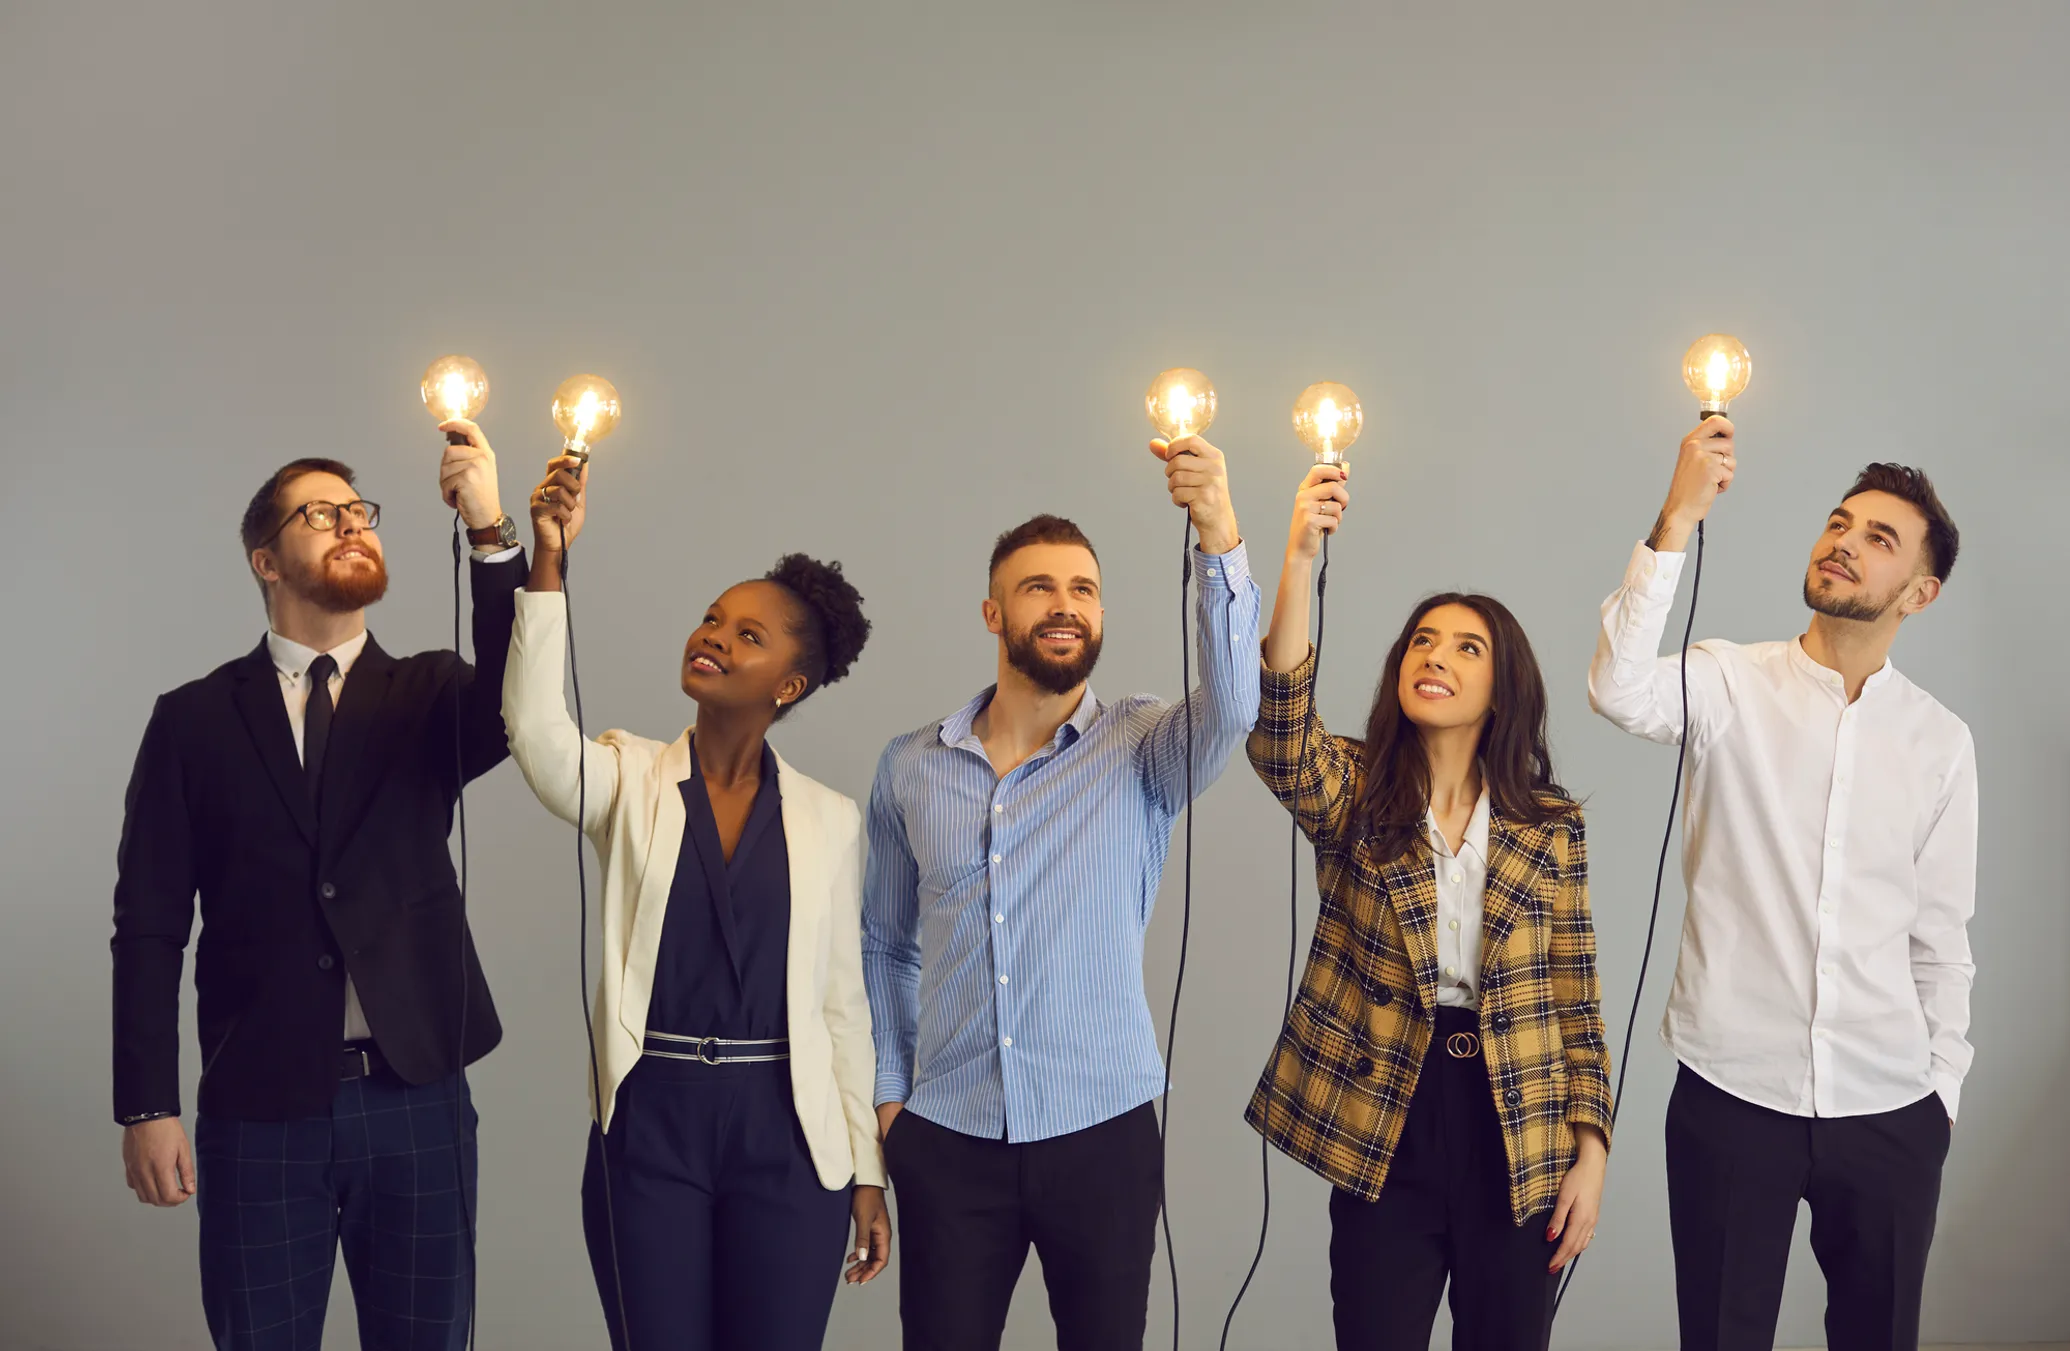 Group of happy diverse business people standing in studio and holding glowing light